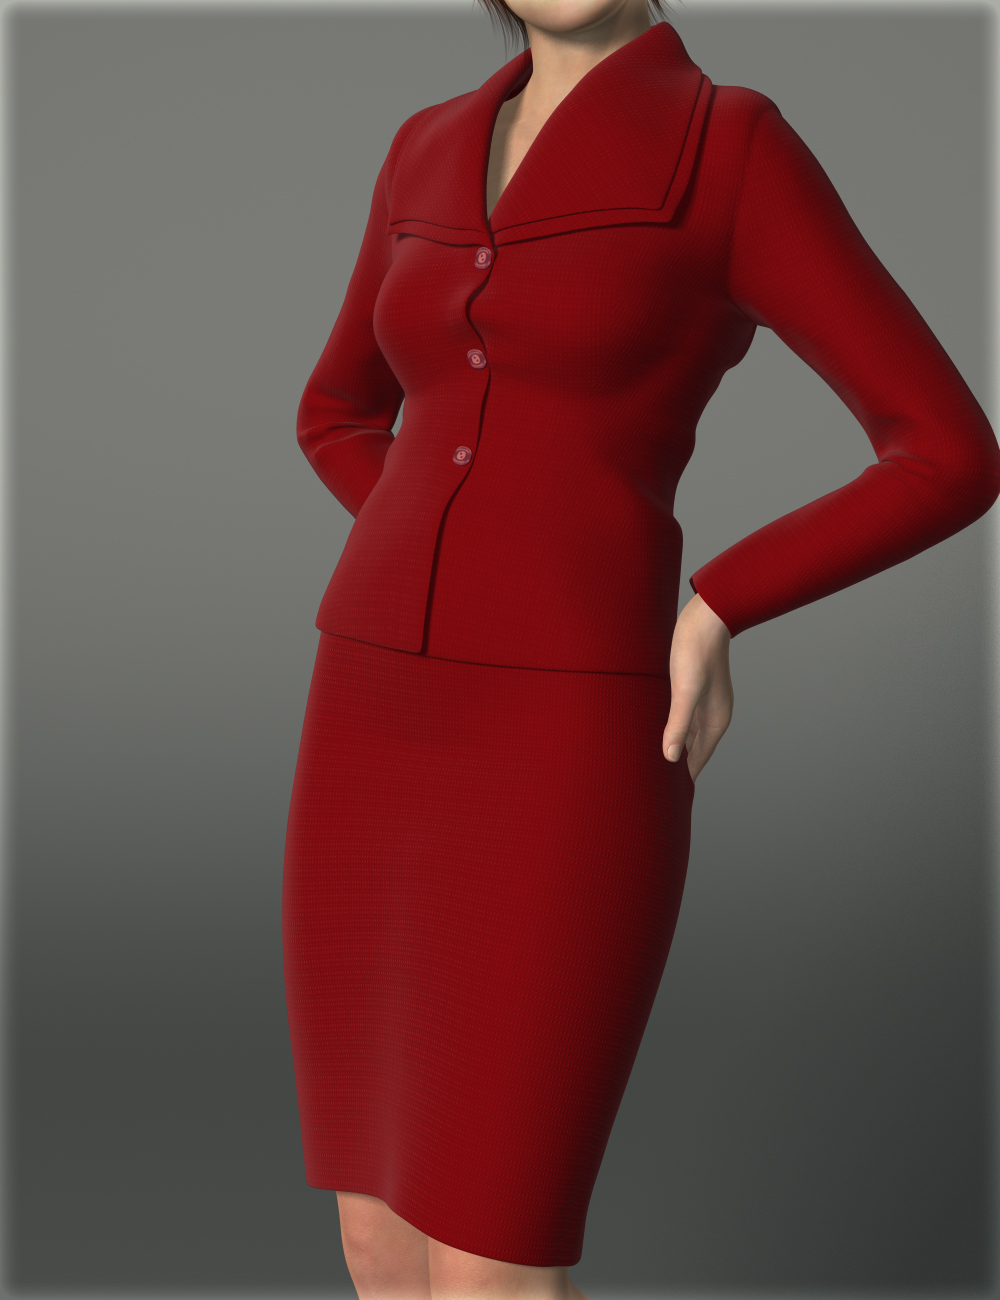 Women's Suit A for Genesis 2 Female(s) by: IH Kang, 3D Models by Daz 3D